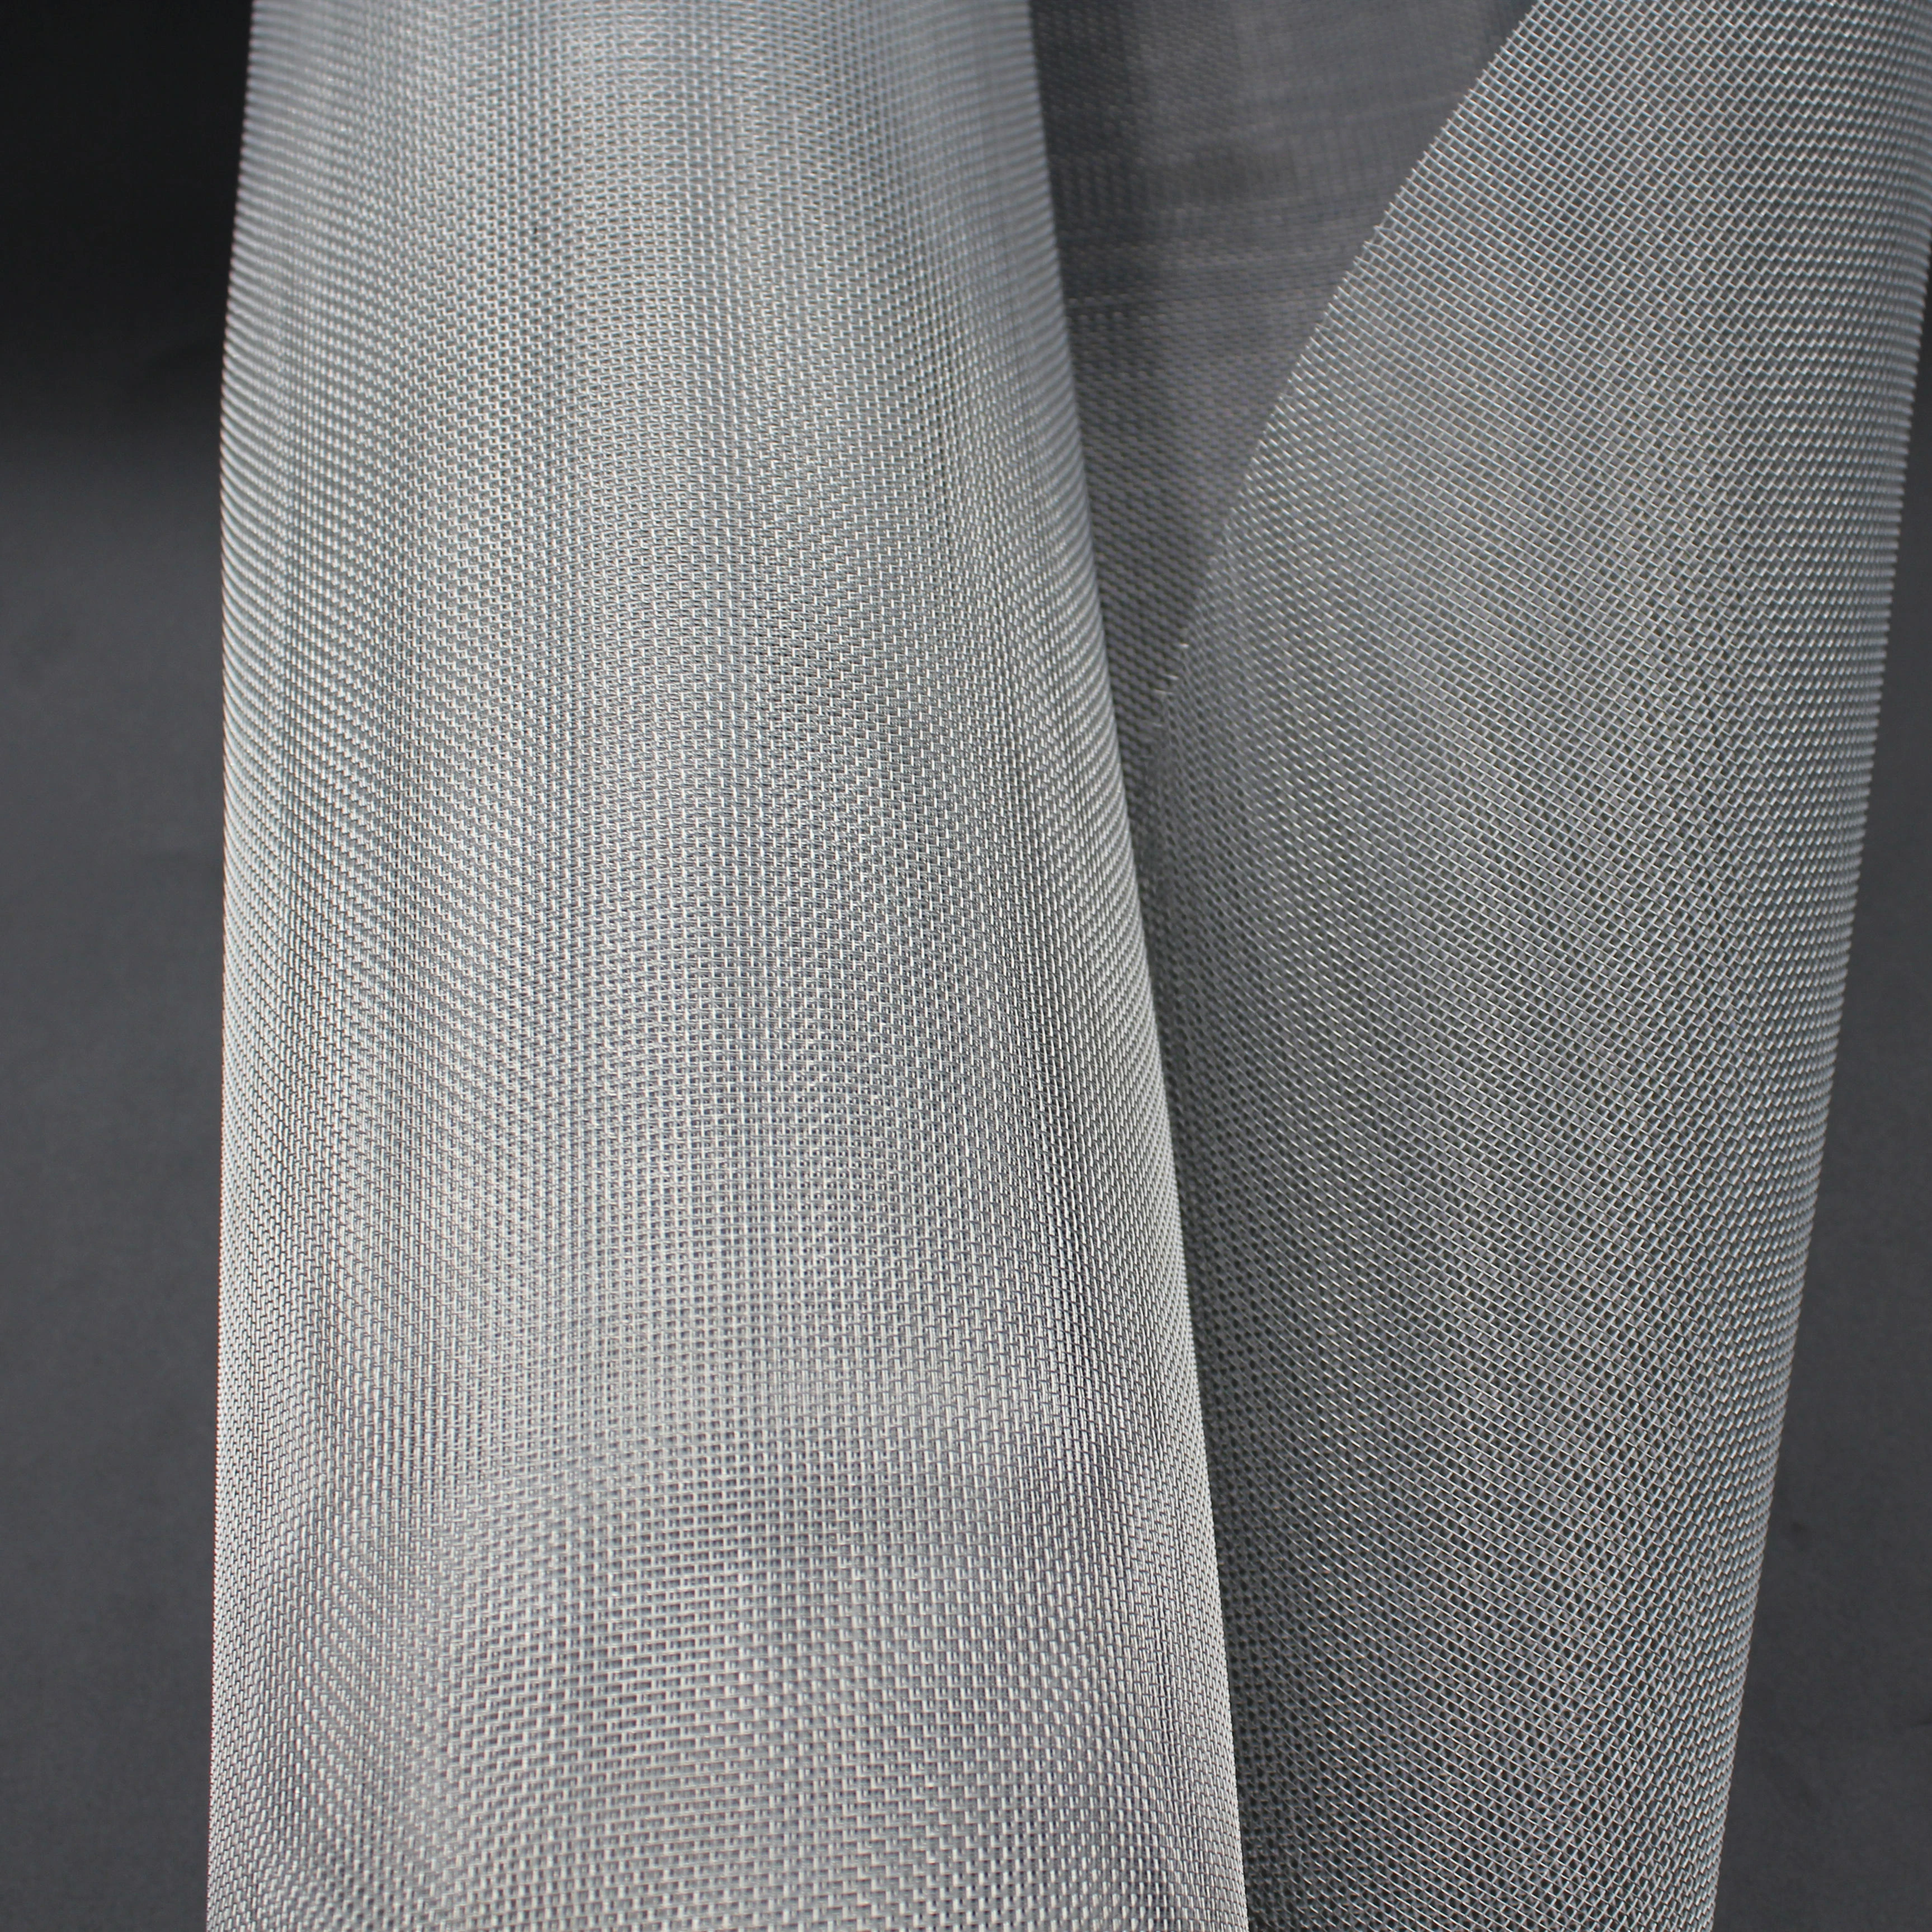 Stainless steel wire mesh price/ stainless steel fine mesh /woven stainless steel wire mesh